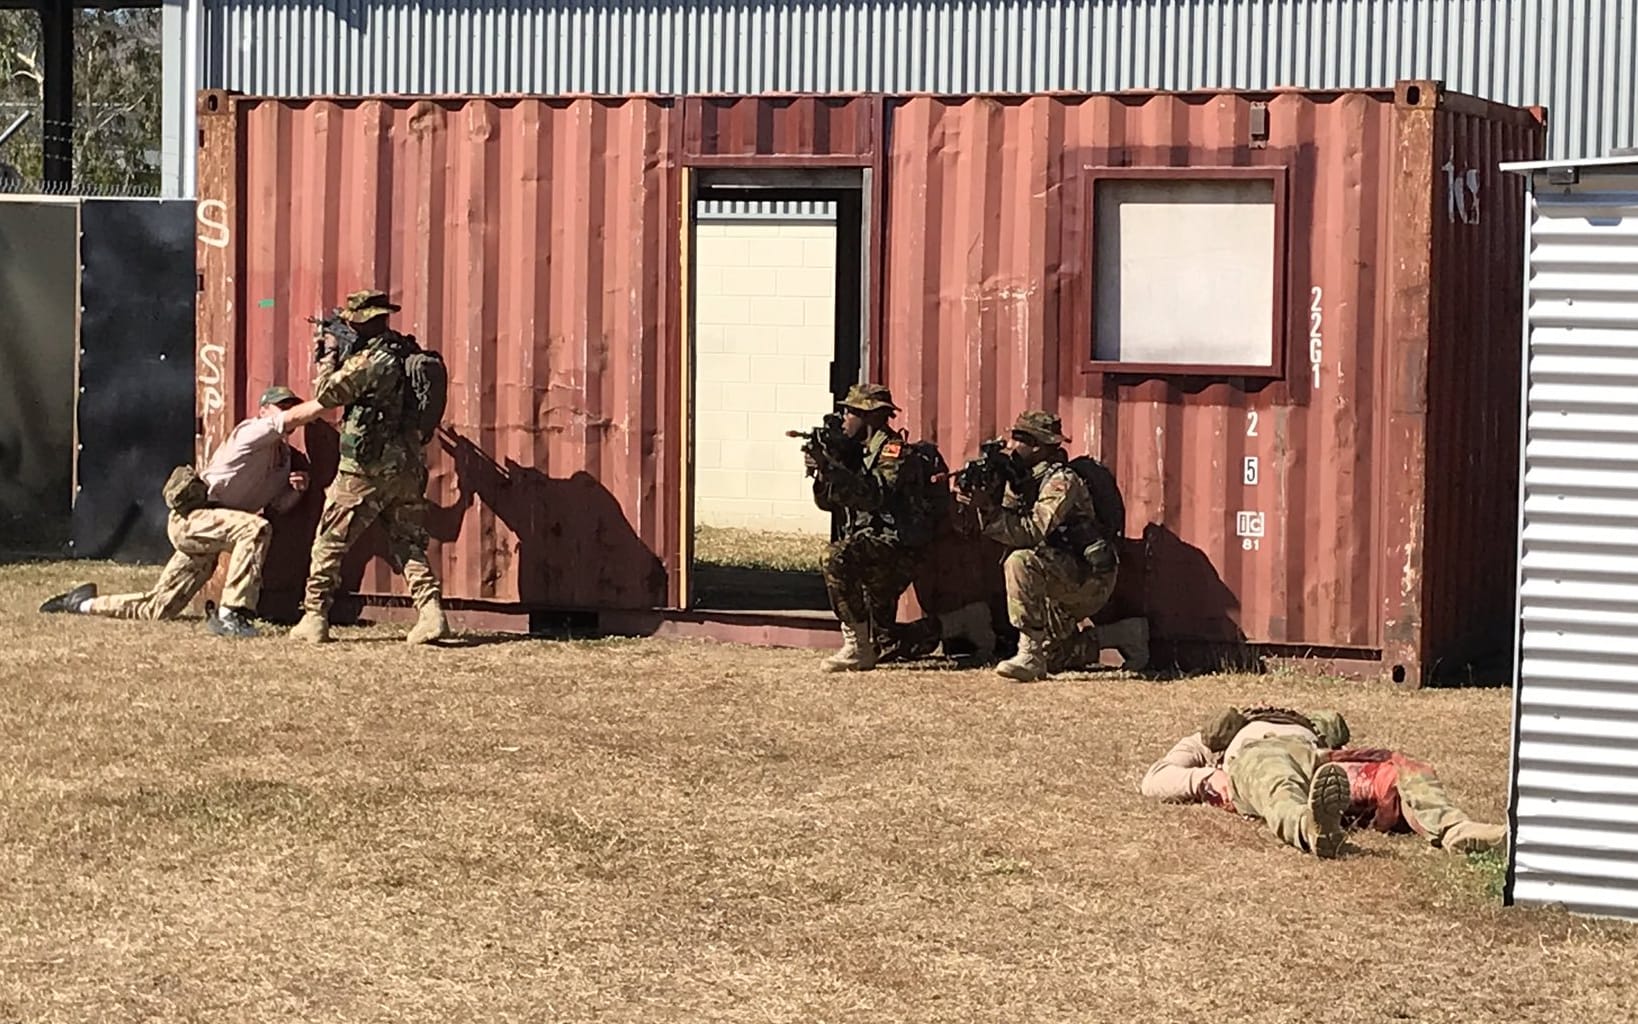 PNGDF personnel in Townsville for training in the lead-up to the International Military Skills Competition being hosted by the ADF. August 2019